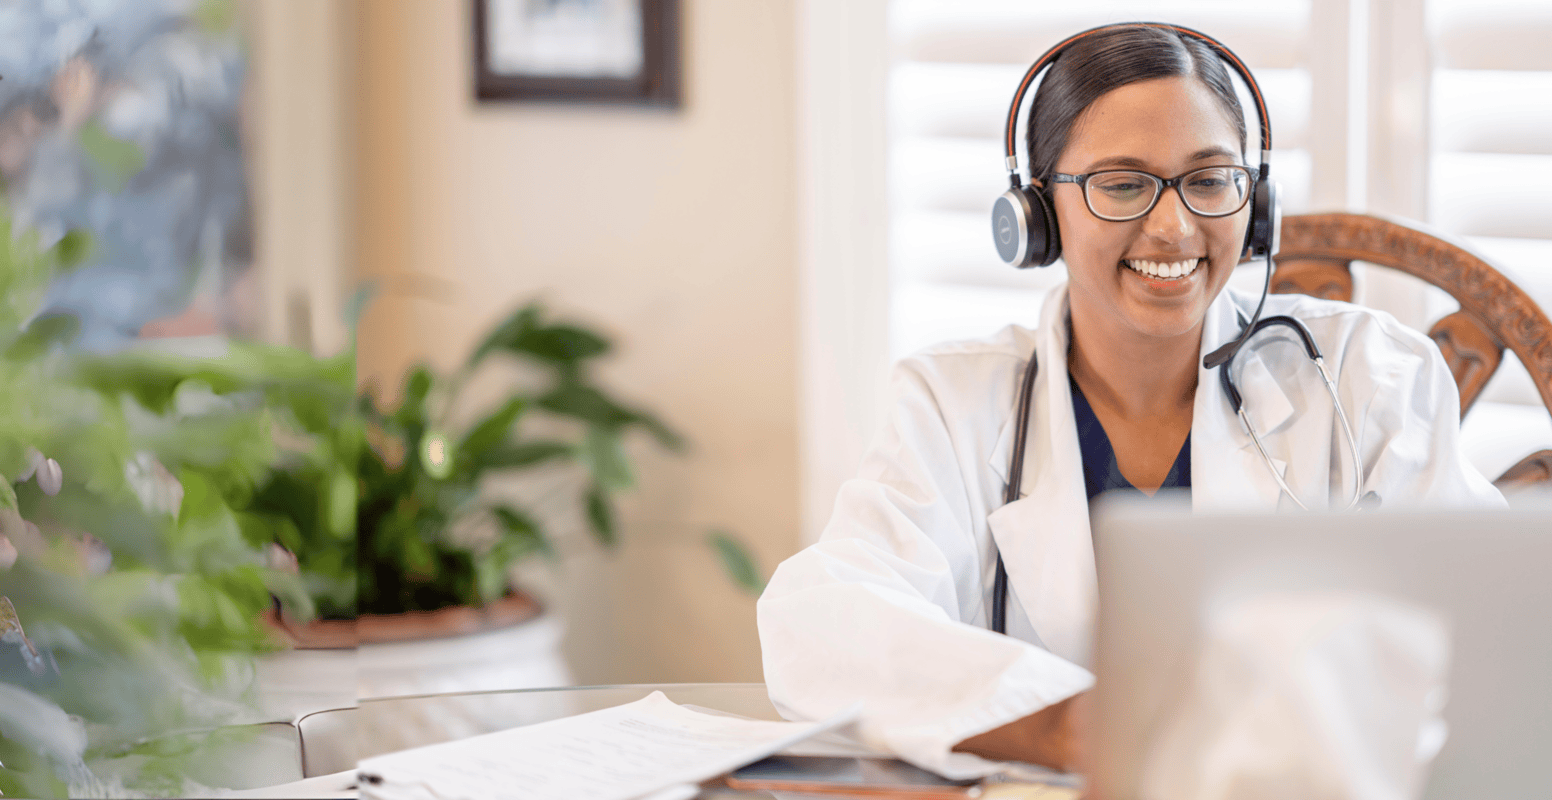 Everything You Need To Know About Telemedicine: Statistics, Usage, Trends